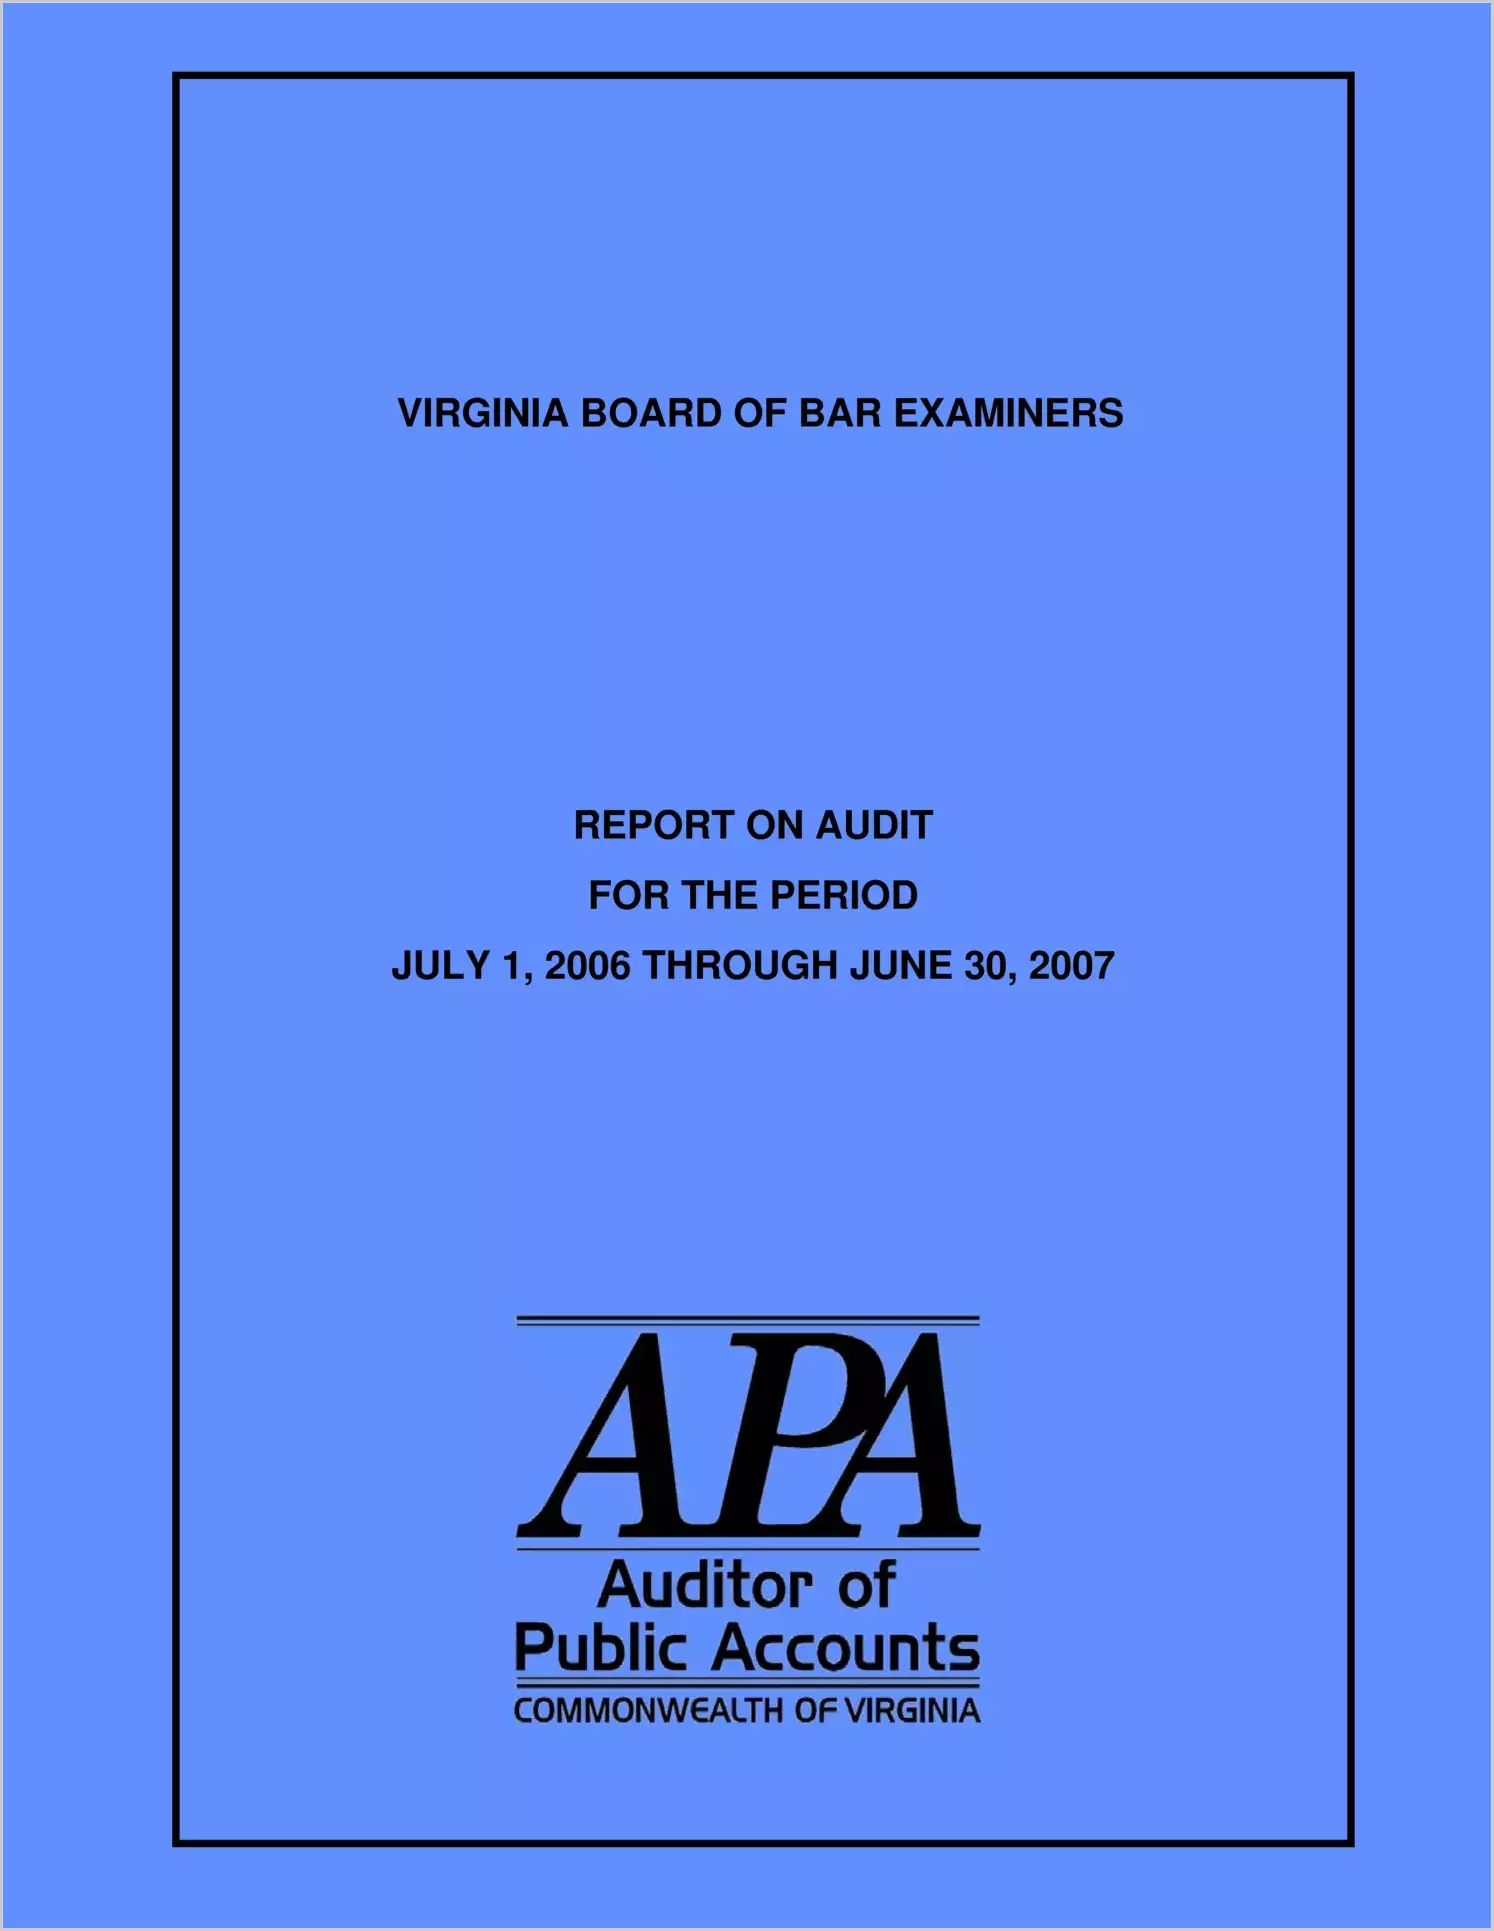 Virginia Board of Bar Examiners Report on Audit for the Period July 1, 2006 through June 30, 2007